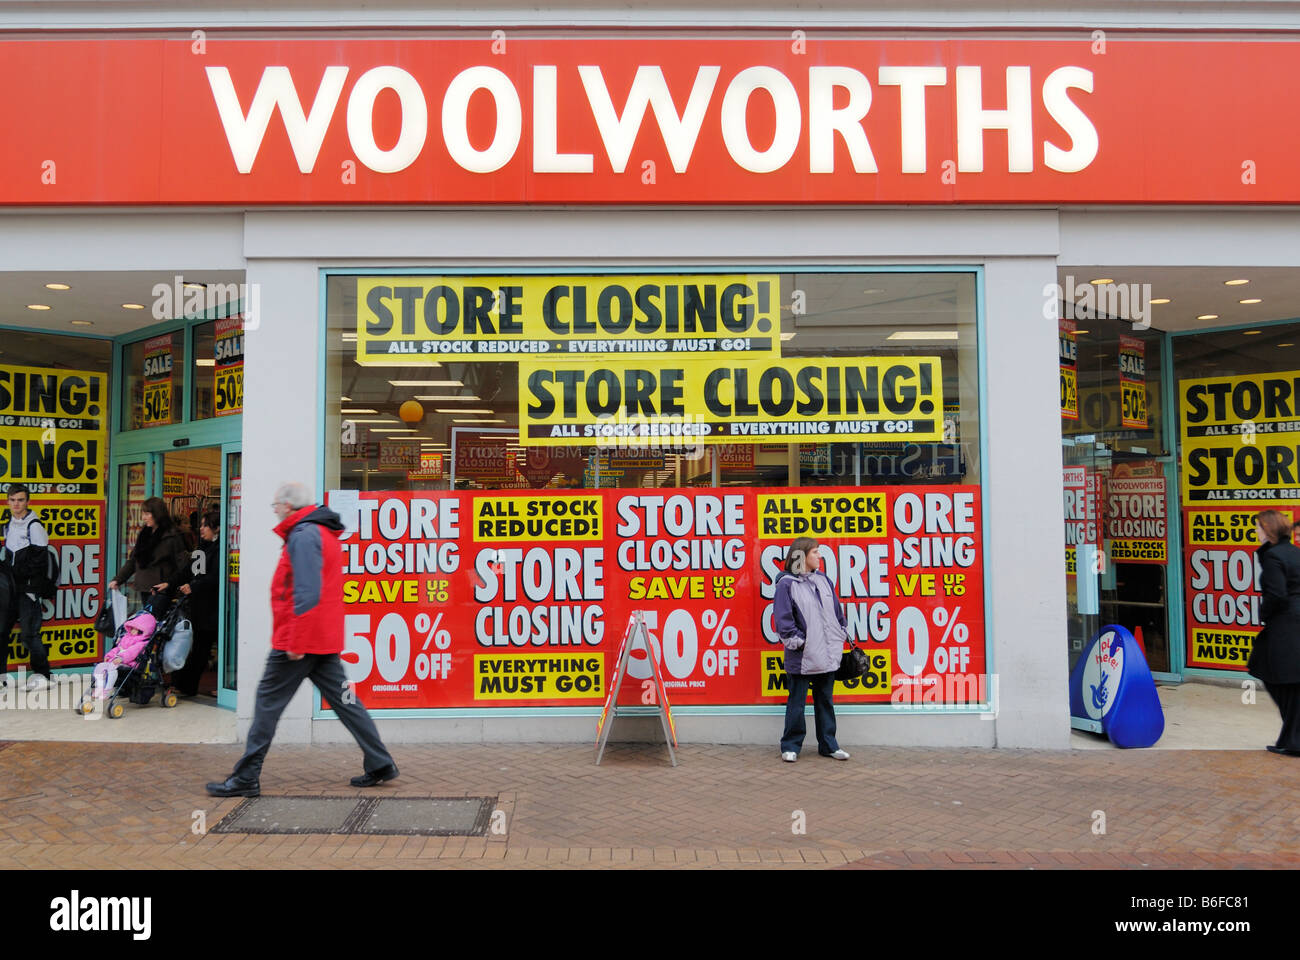 Image result for woolworths store images